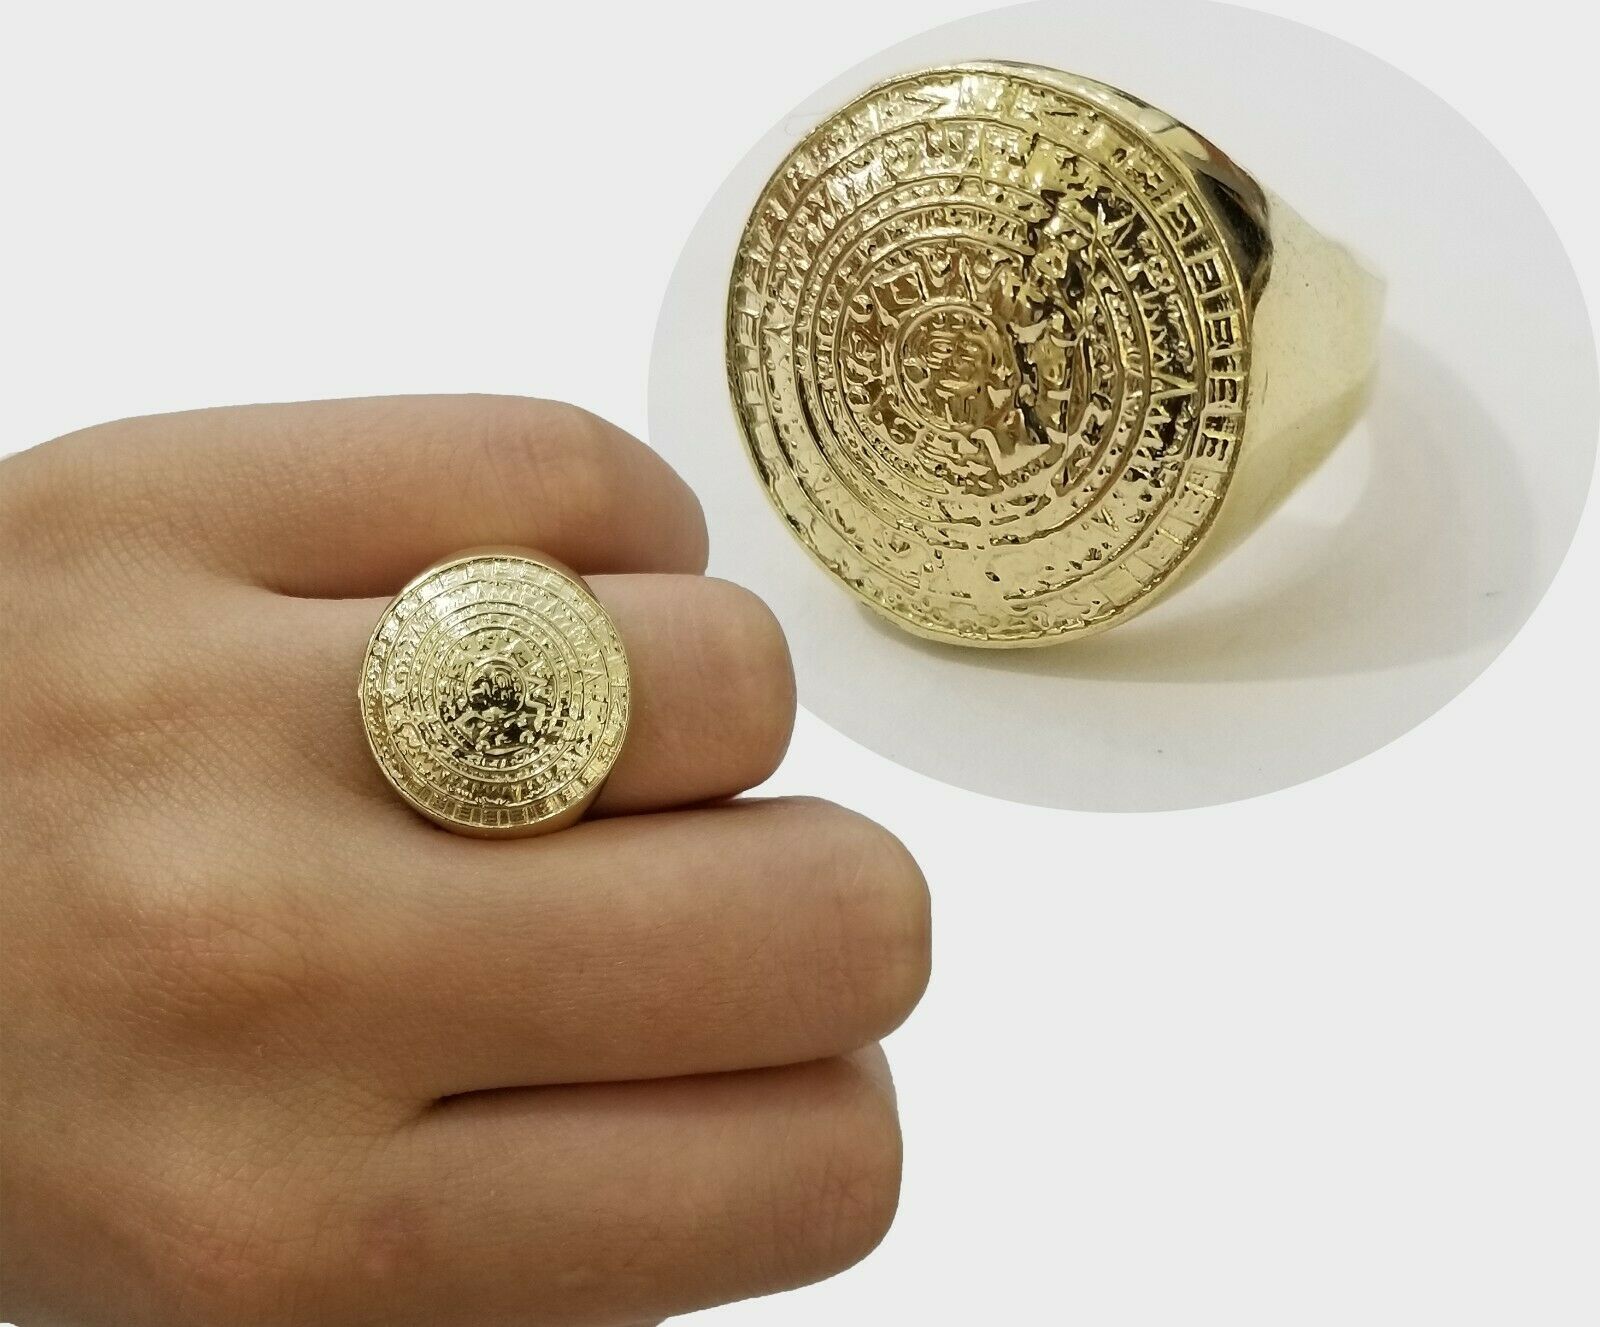 Unisex 22 Carat Gold Ganesha Ring at Rs 5000 in Thane | ID: 27487590930